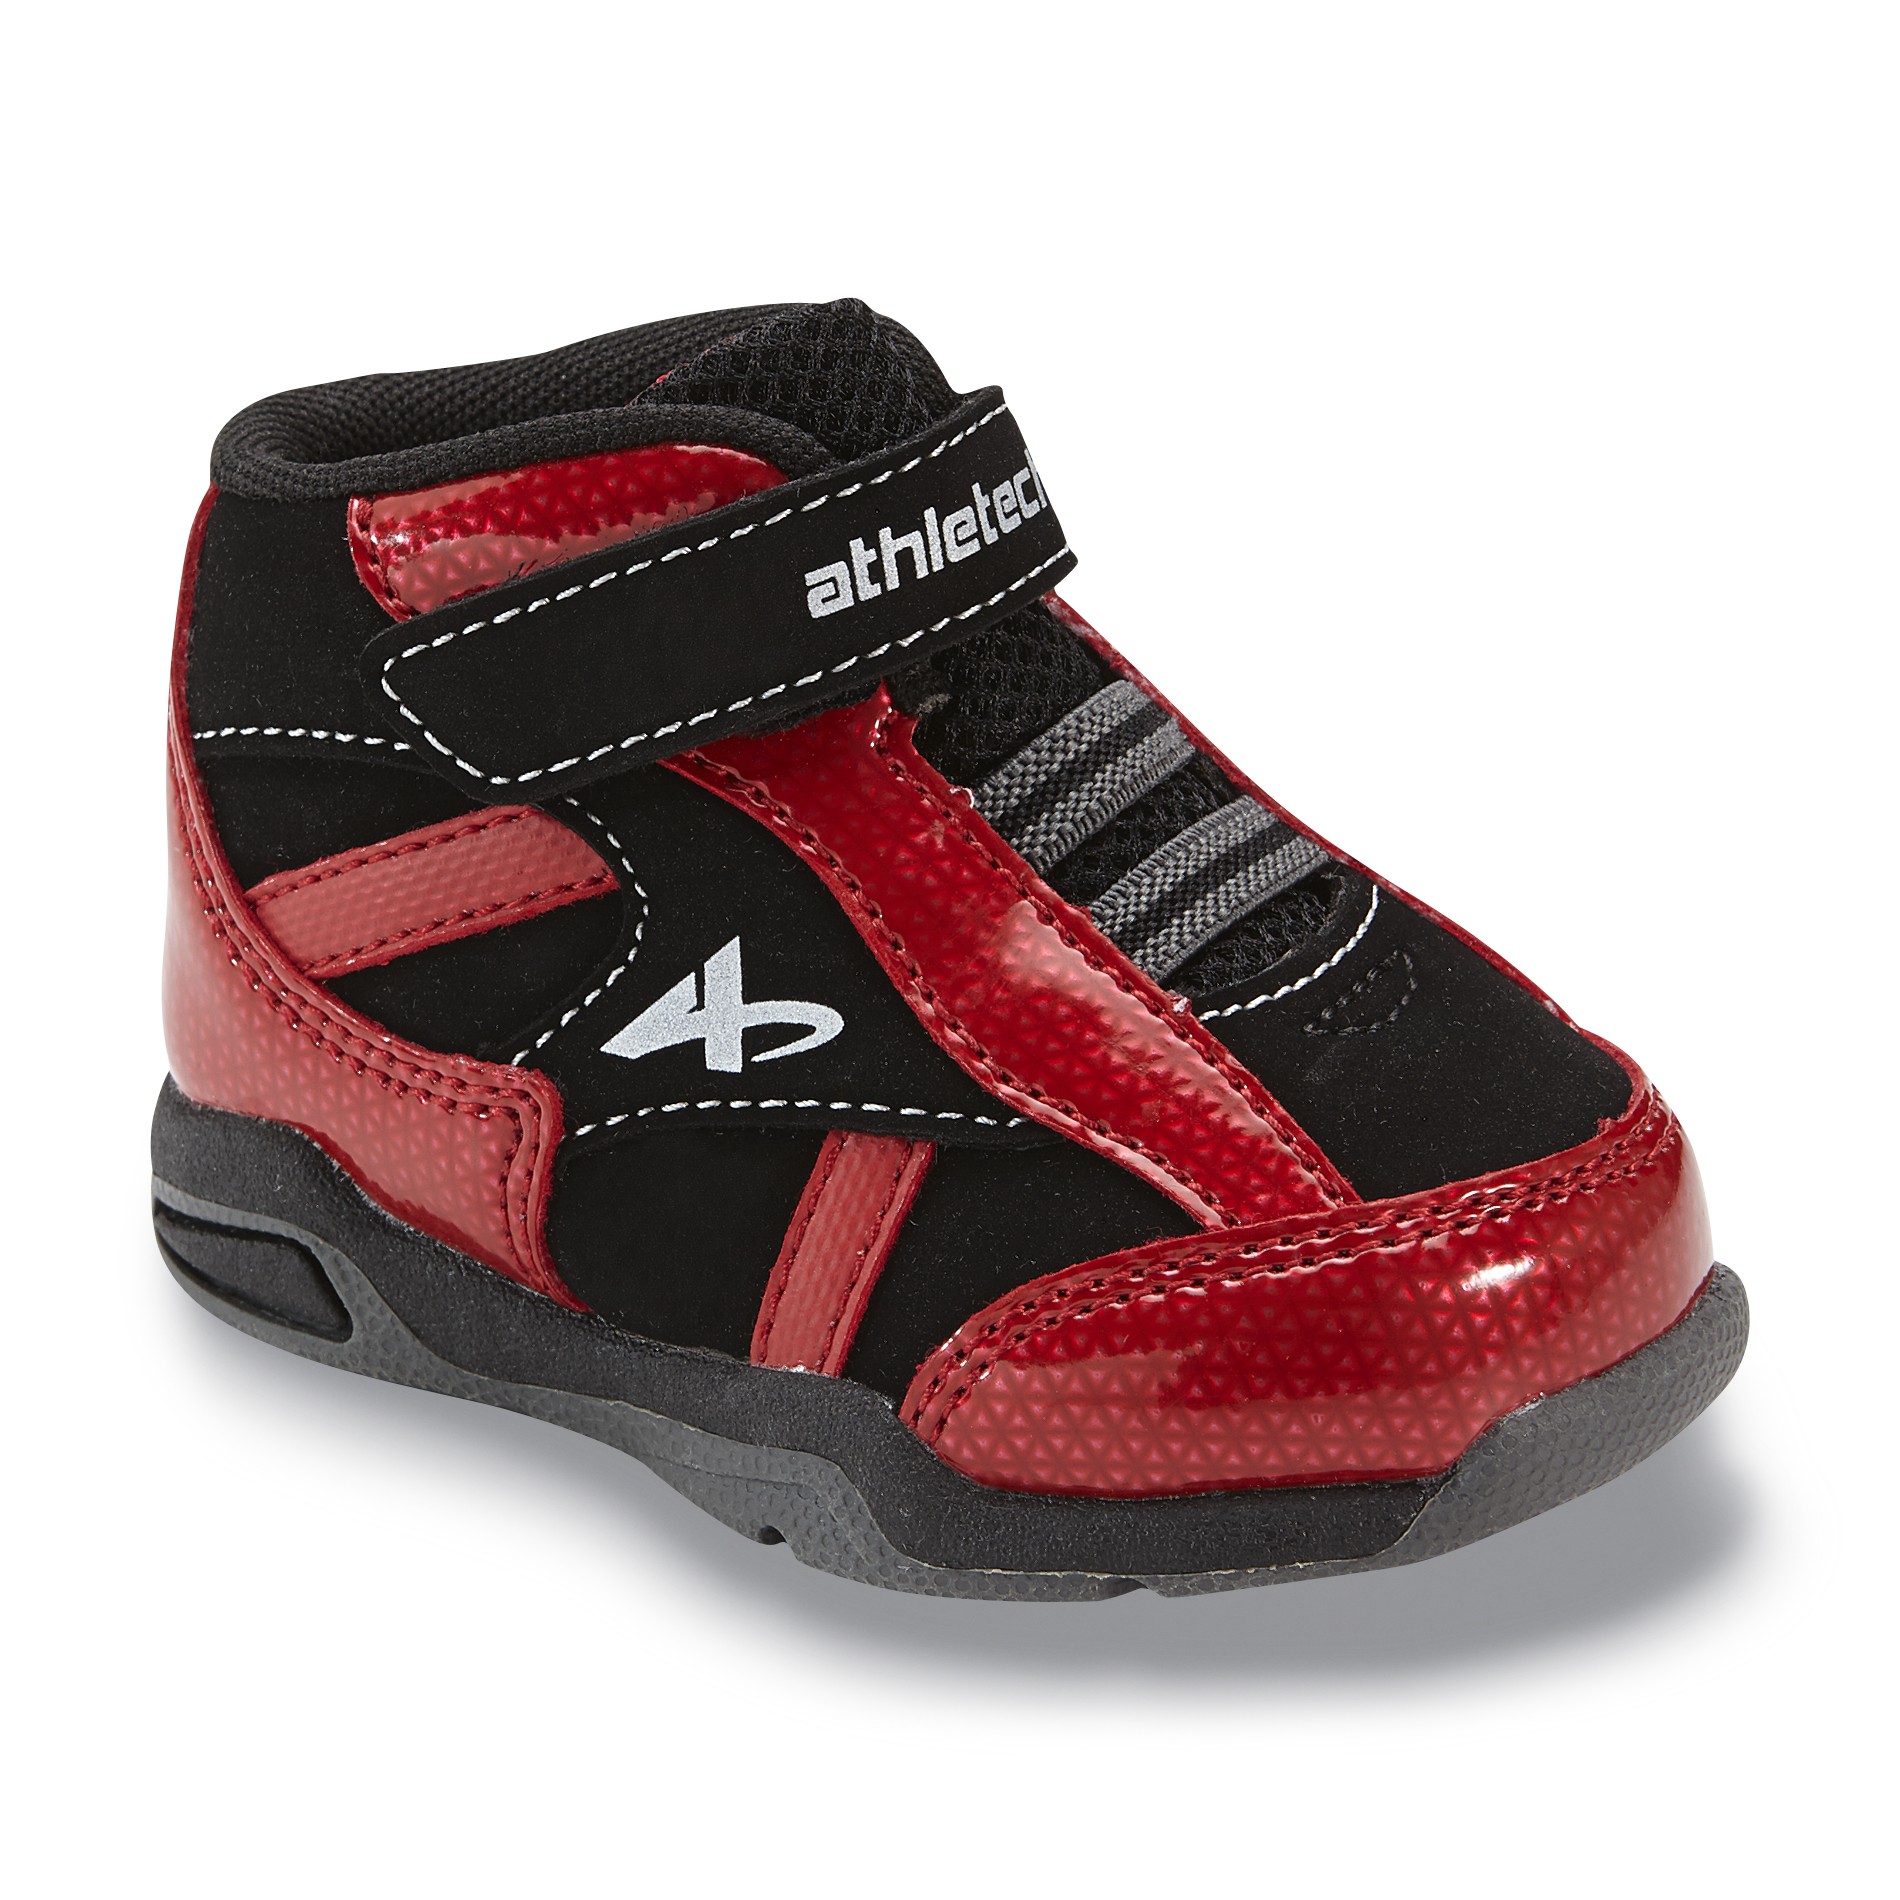 Athletech Baby/Toddler Boy's Proven Black/Red High-Top Athletic Shoe